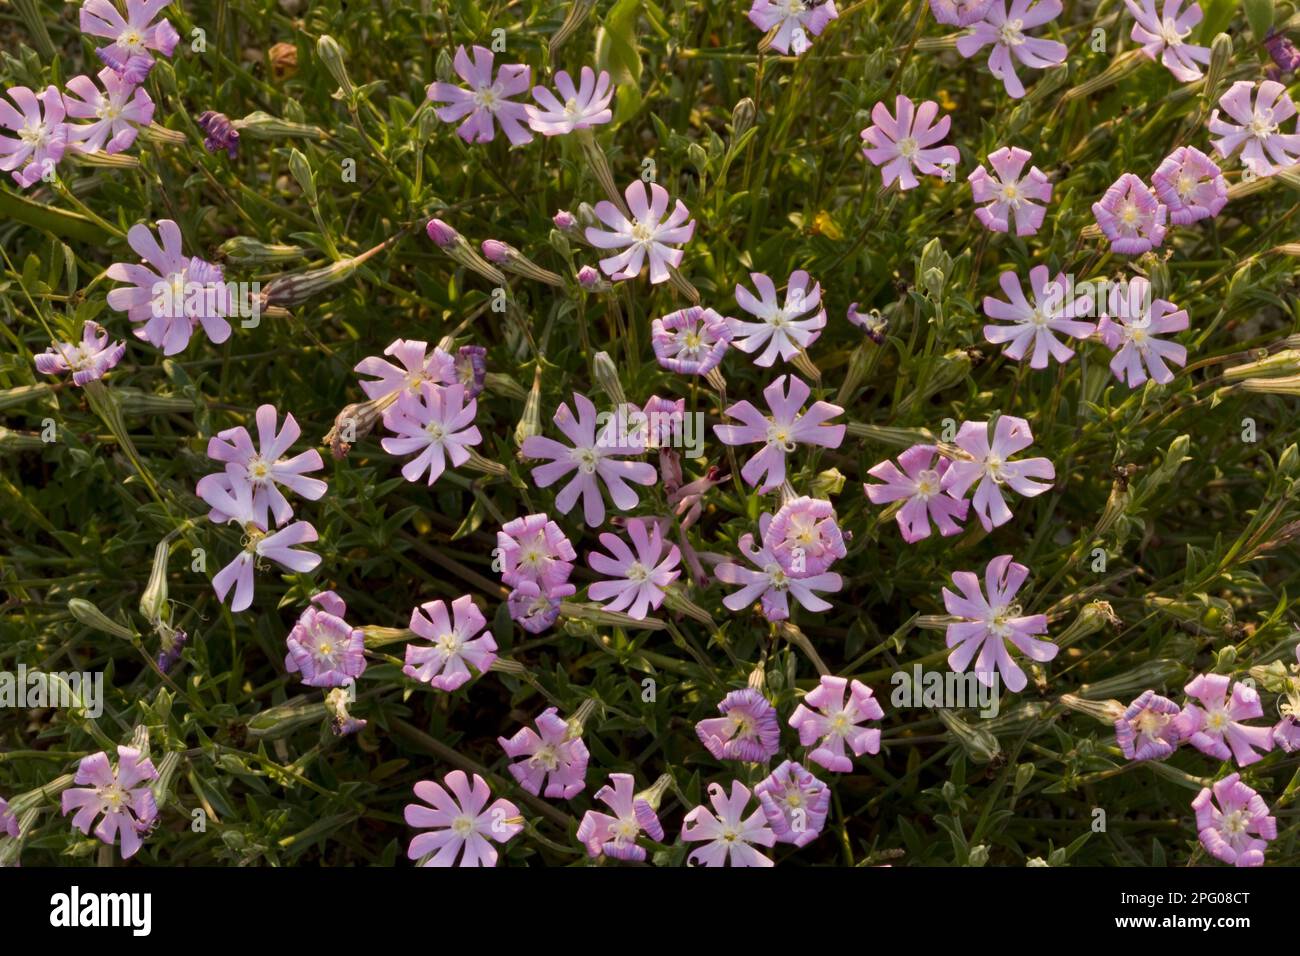 Pink Mediterranean damselfly (Silene colorata) in flower, growing on a sand dune, Corsica, France Stock Photo